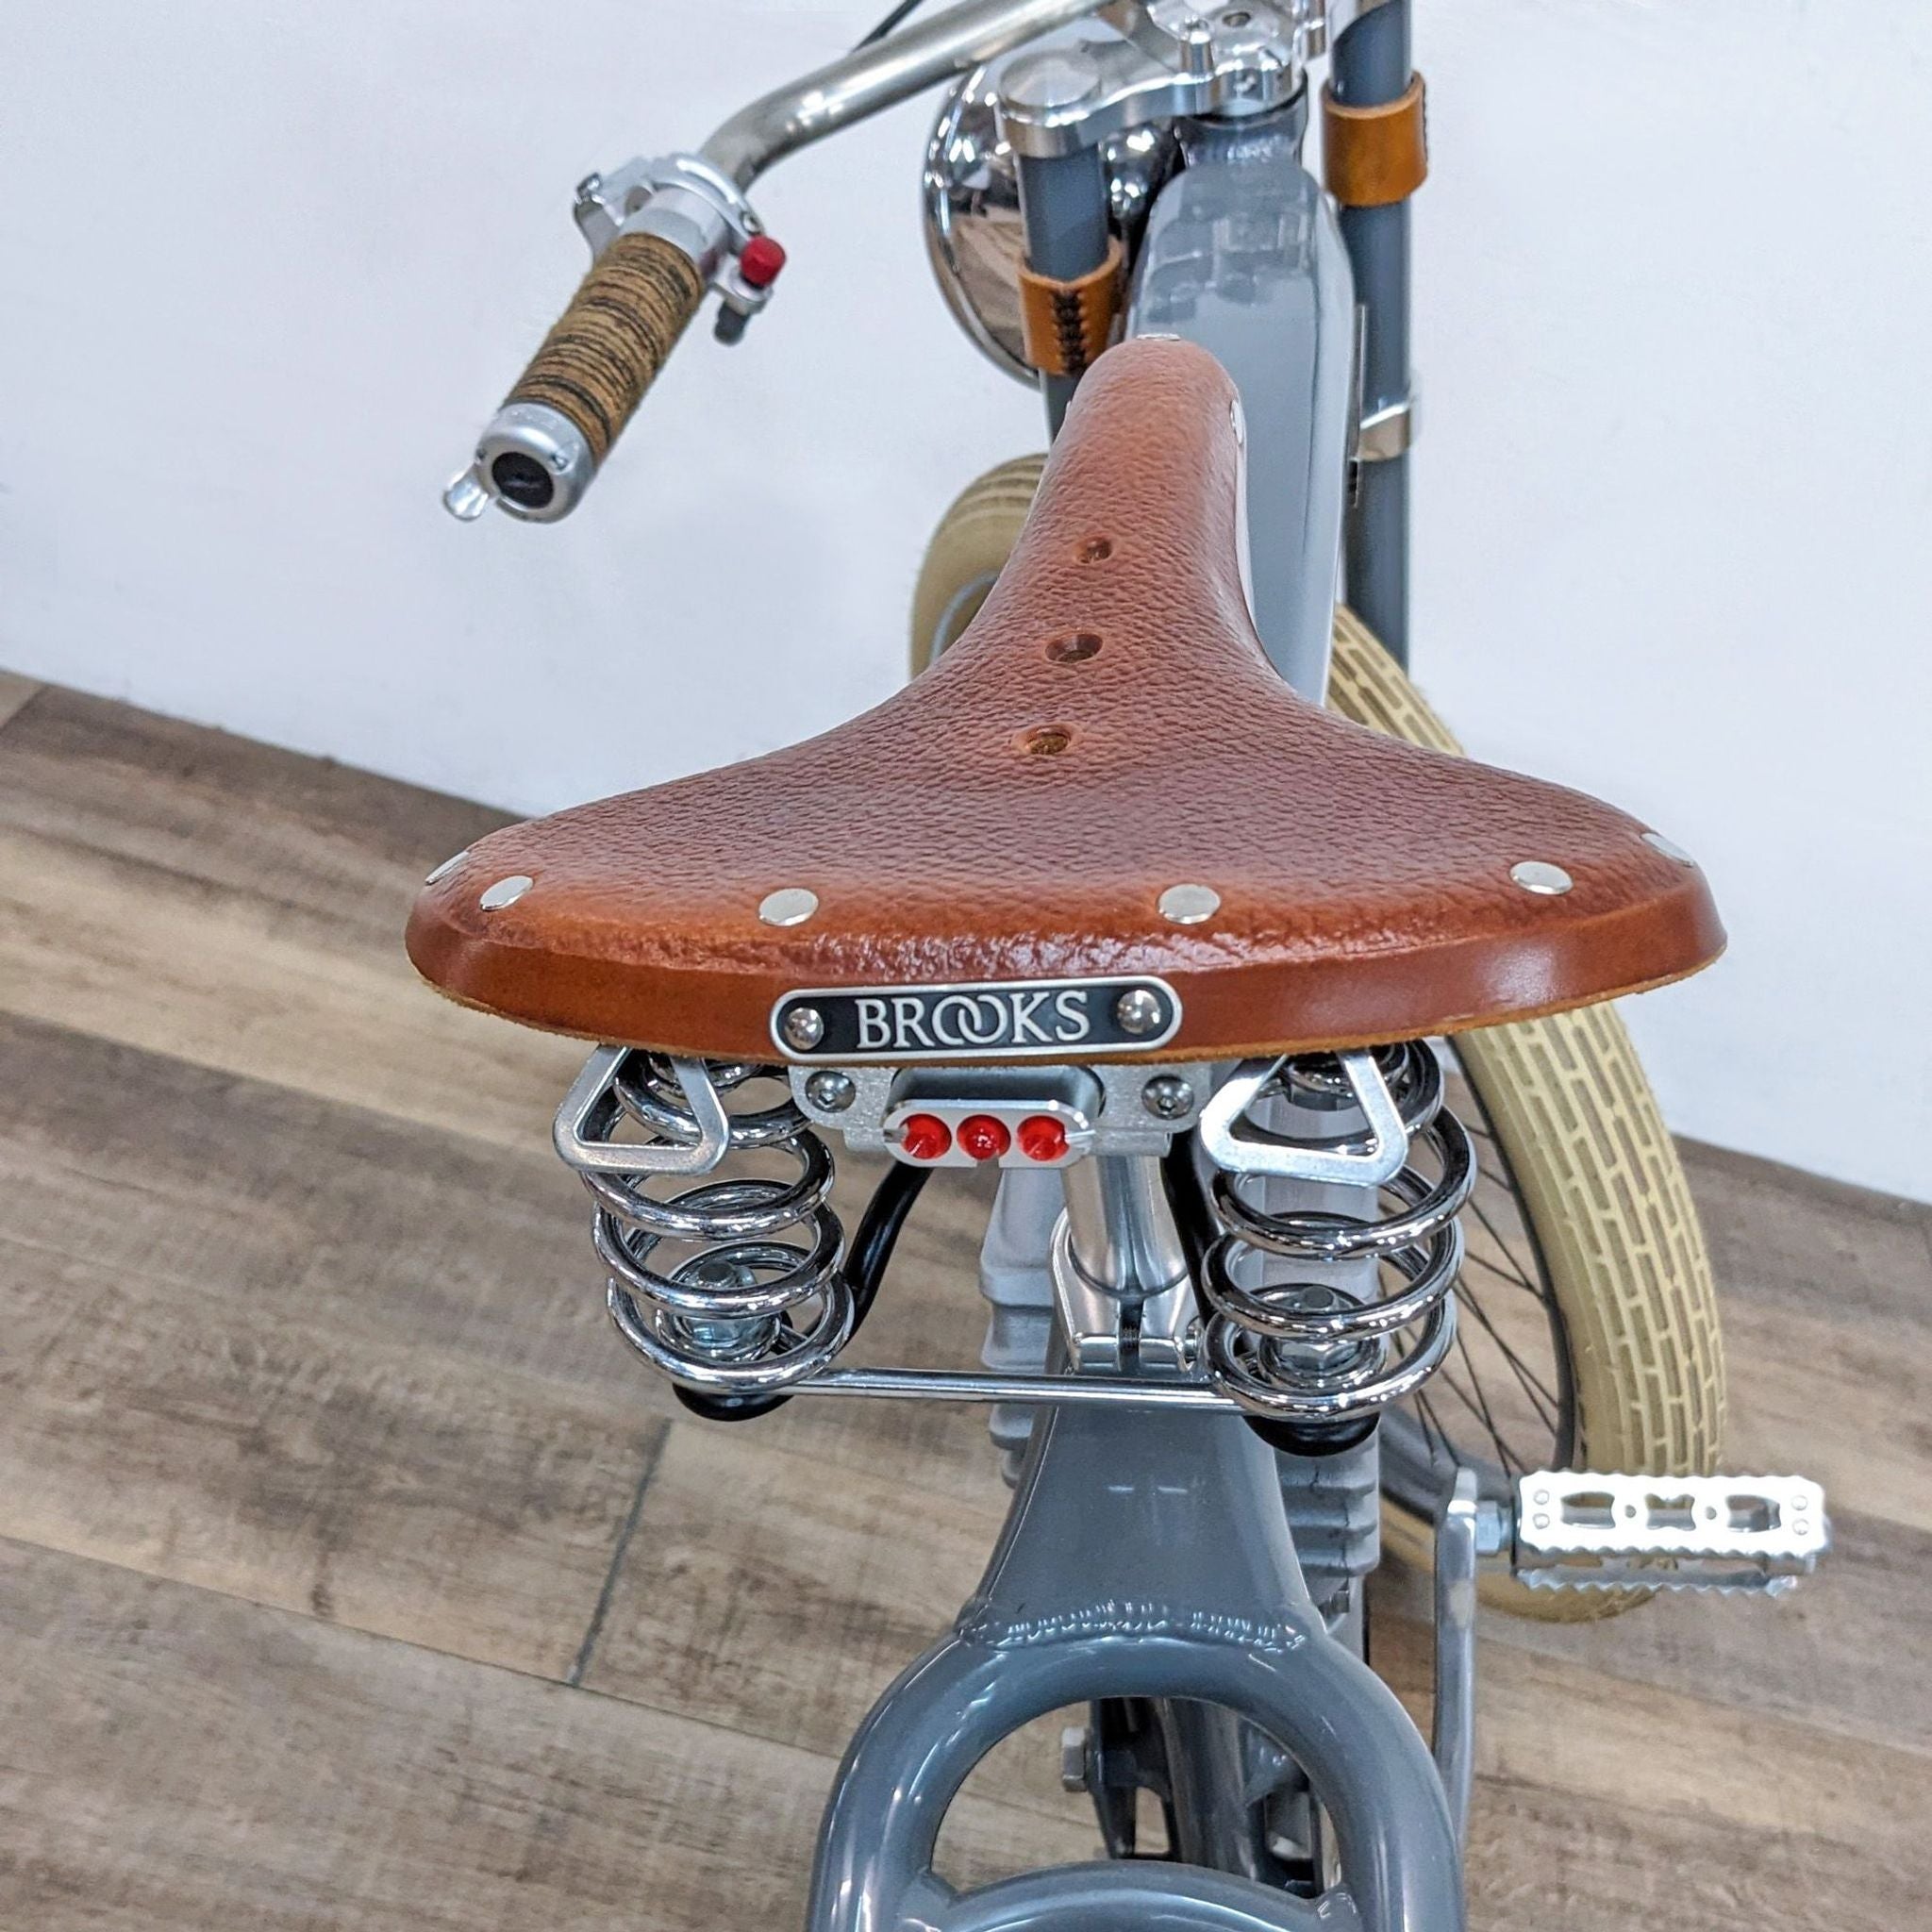 3. Close-up of a brown leather Brooks saddle on a Vintage Electric bicycle, showing the springs and rear red taillights.